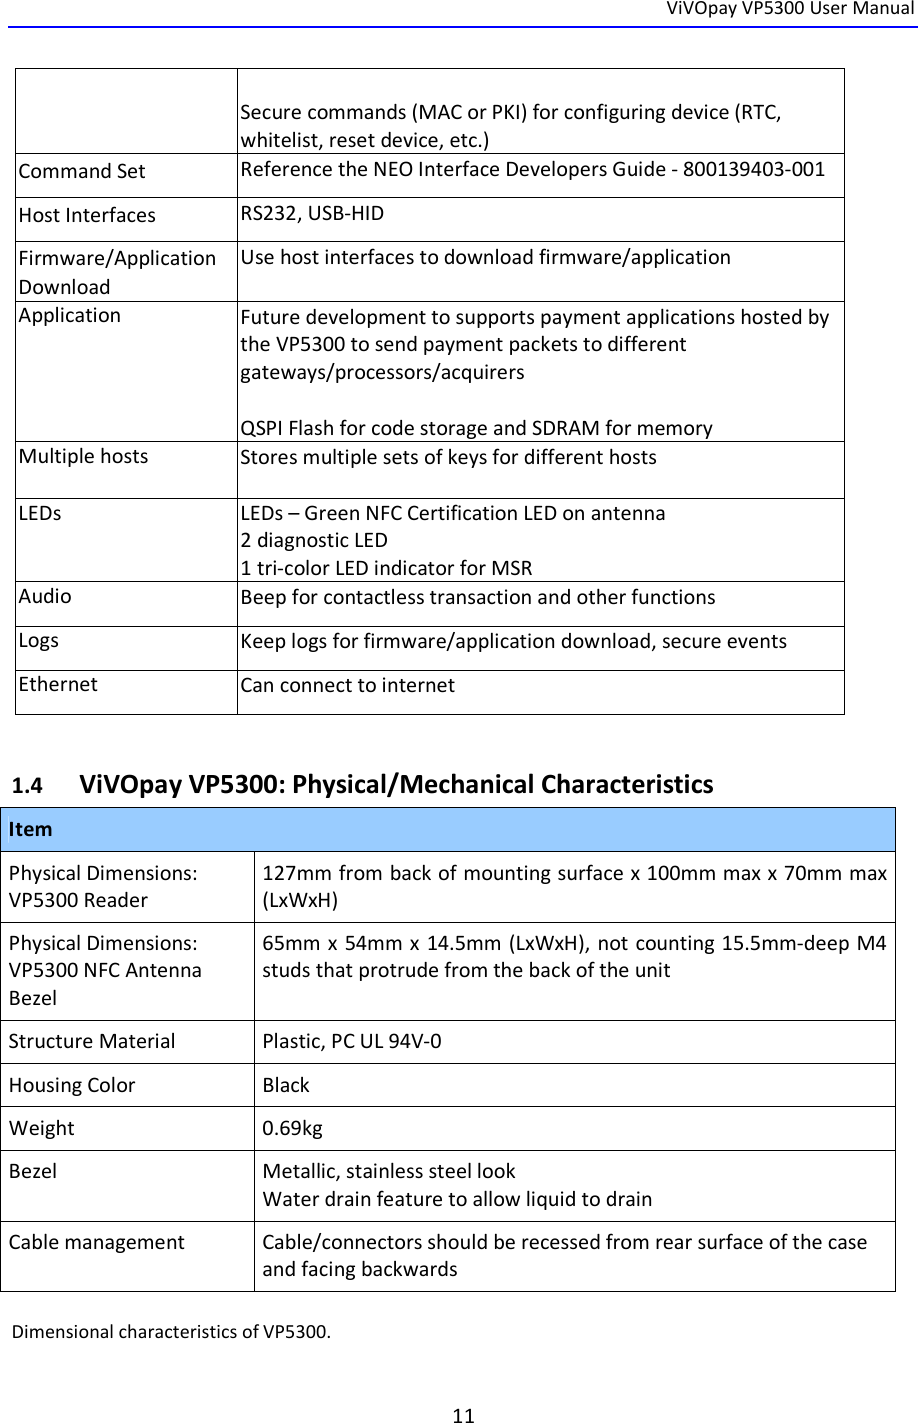  ViVOpay VP5300 User Manual   11   Secure commands (MAC or PKI) for configuring device (RTC, whitelist, reset device, etc.)  Command Set  Reference the NEO Interface Developers Guide - 800139403-001 Host Interfaces  RS232, USB-HID Firmware/Application Download Use host interfaces to download firmware/application Application Future development to supports payment applications hosted by the VP5300 to send payment packets to different gateways/processors/acquirers  QSPI Flash for code storage and SDRAM for memory Multiple hosts Stores multiple sets of keys for different hosts  LEDs LEDs – Green NFC Certification LED on antenna  2 diagnostic LED 1 tri-color LED indicator for MSR Audio Beep for contactless transaction and other functions Logs Keep logs for firmware/application download, secure events Ethernet Can connect to internet  1.4 ViVOpay VP5300: Physical/Mechanical Characteristics Item Physical Dimensions: VP5300 Reader 127mm from back of mounting surface x 100mm max x 70mm max (LxWxH) Physical Dimensions: VP5300 NFC Antenna Bezel 65mm x 54mm x 14.5mm (LxWxH), not counting 15.5mm-deep M4 studs that protrude from the back of the unit Structure Material Plastic, PC UL 94V-0 Housing Color Black Weight 0.69kg Bezel  Metallic, stainless steel look Water drain feature to allow liquid to drain Cable management Cable/connectors should be recessed from rear surface of the case and facing backwards  Dimensional characteristics of VP5300. 